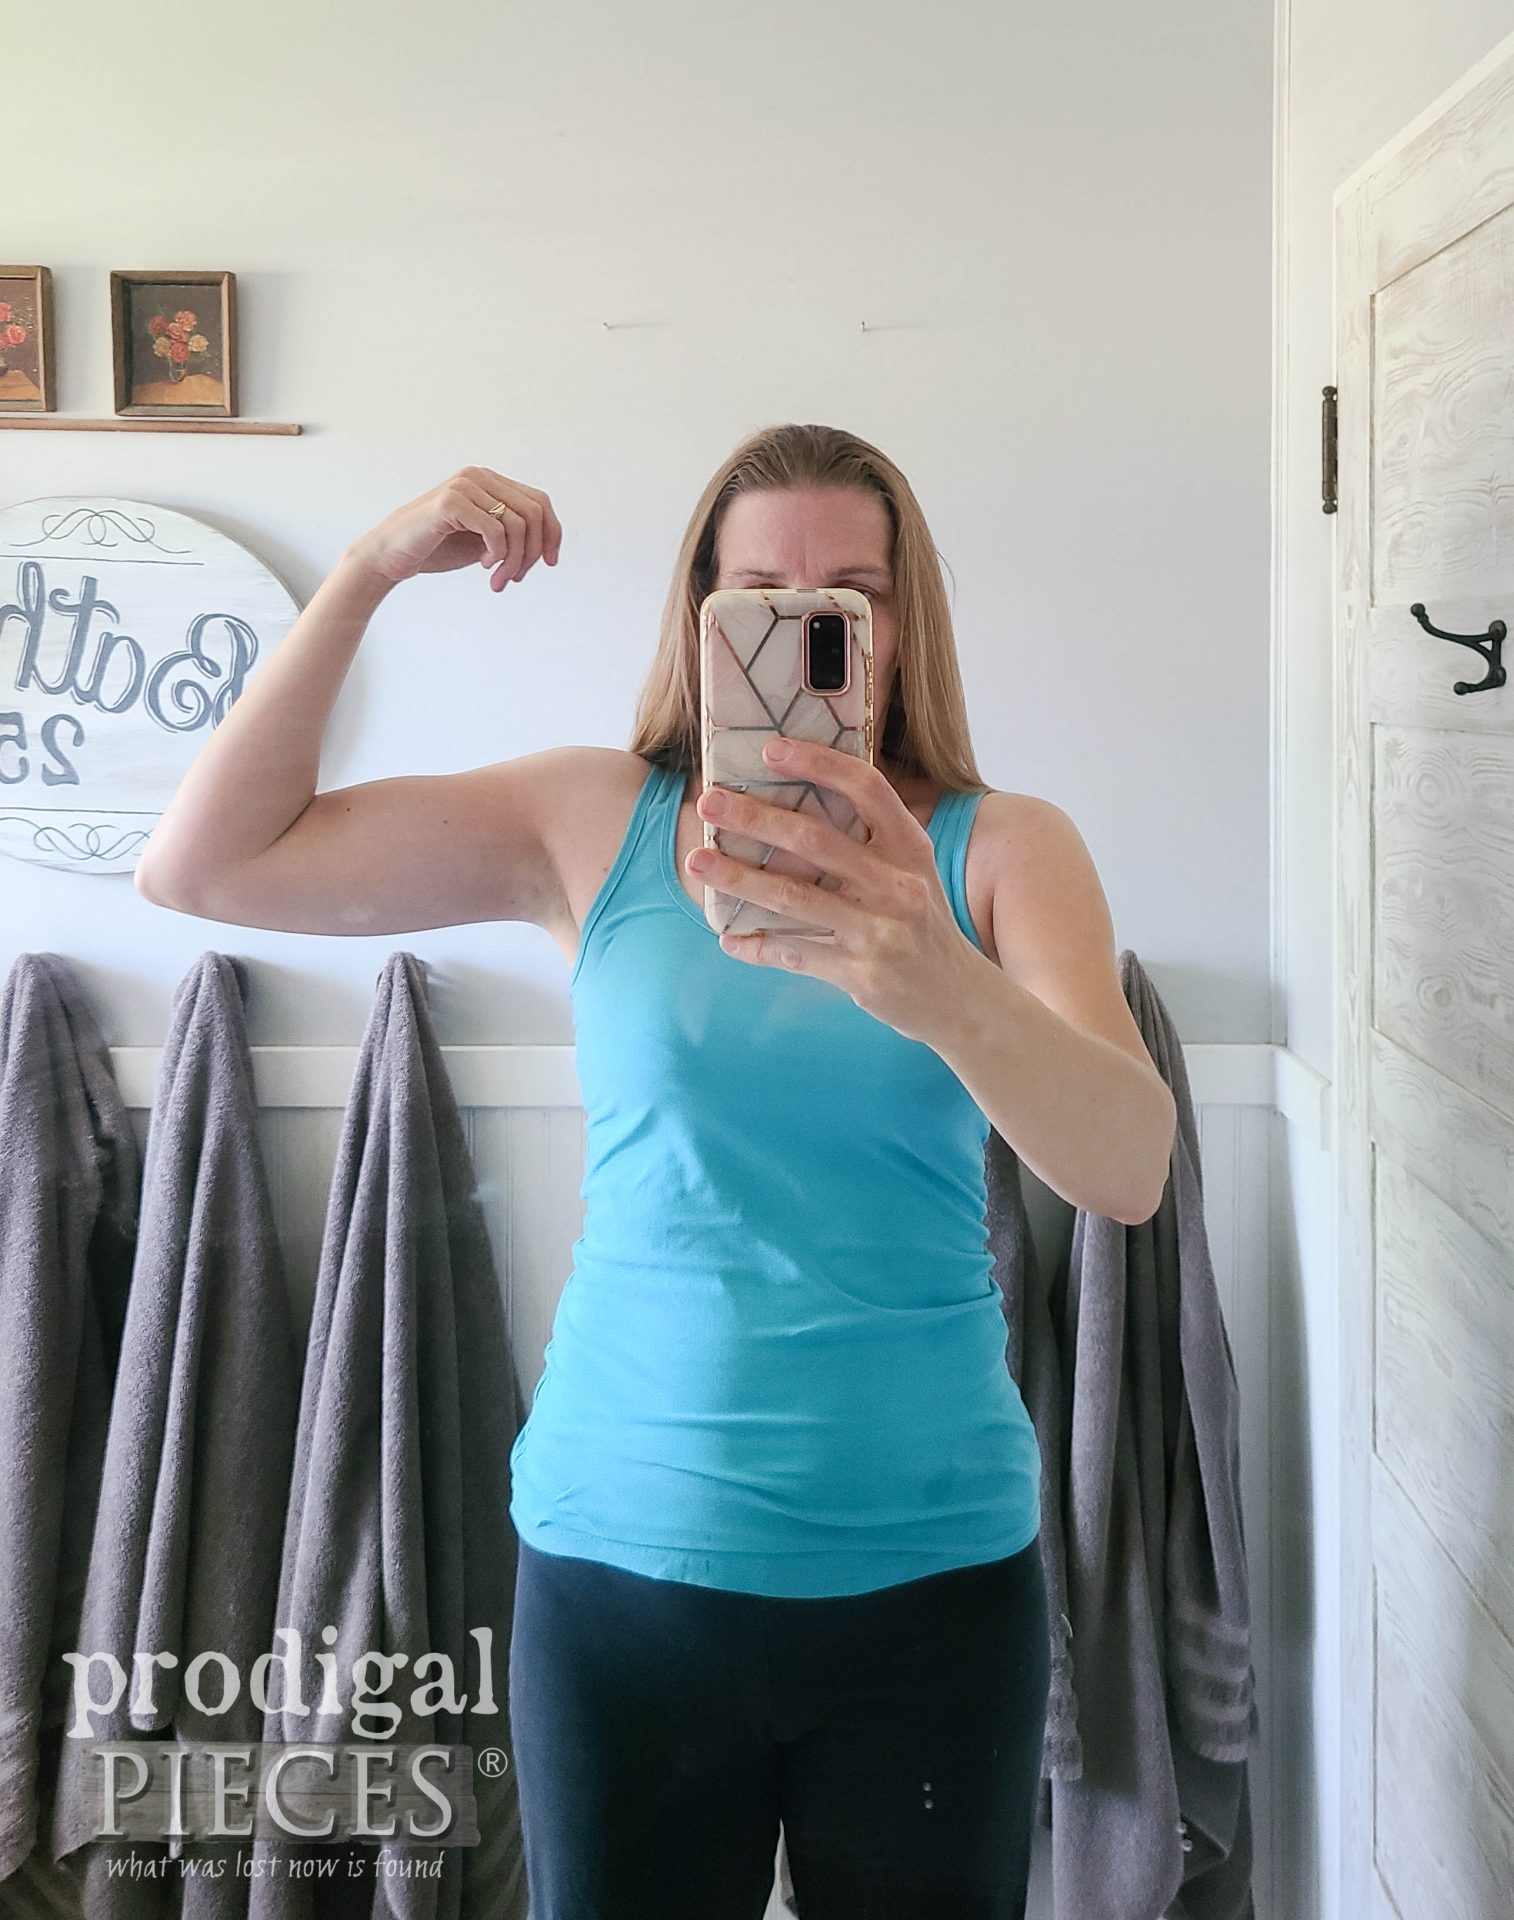 4 Month Fit Over 40 Update by Larissa of Prodigal Pieces | prodigalpieces.com #prodigalpieces #fitness #women #health